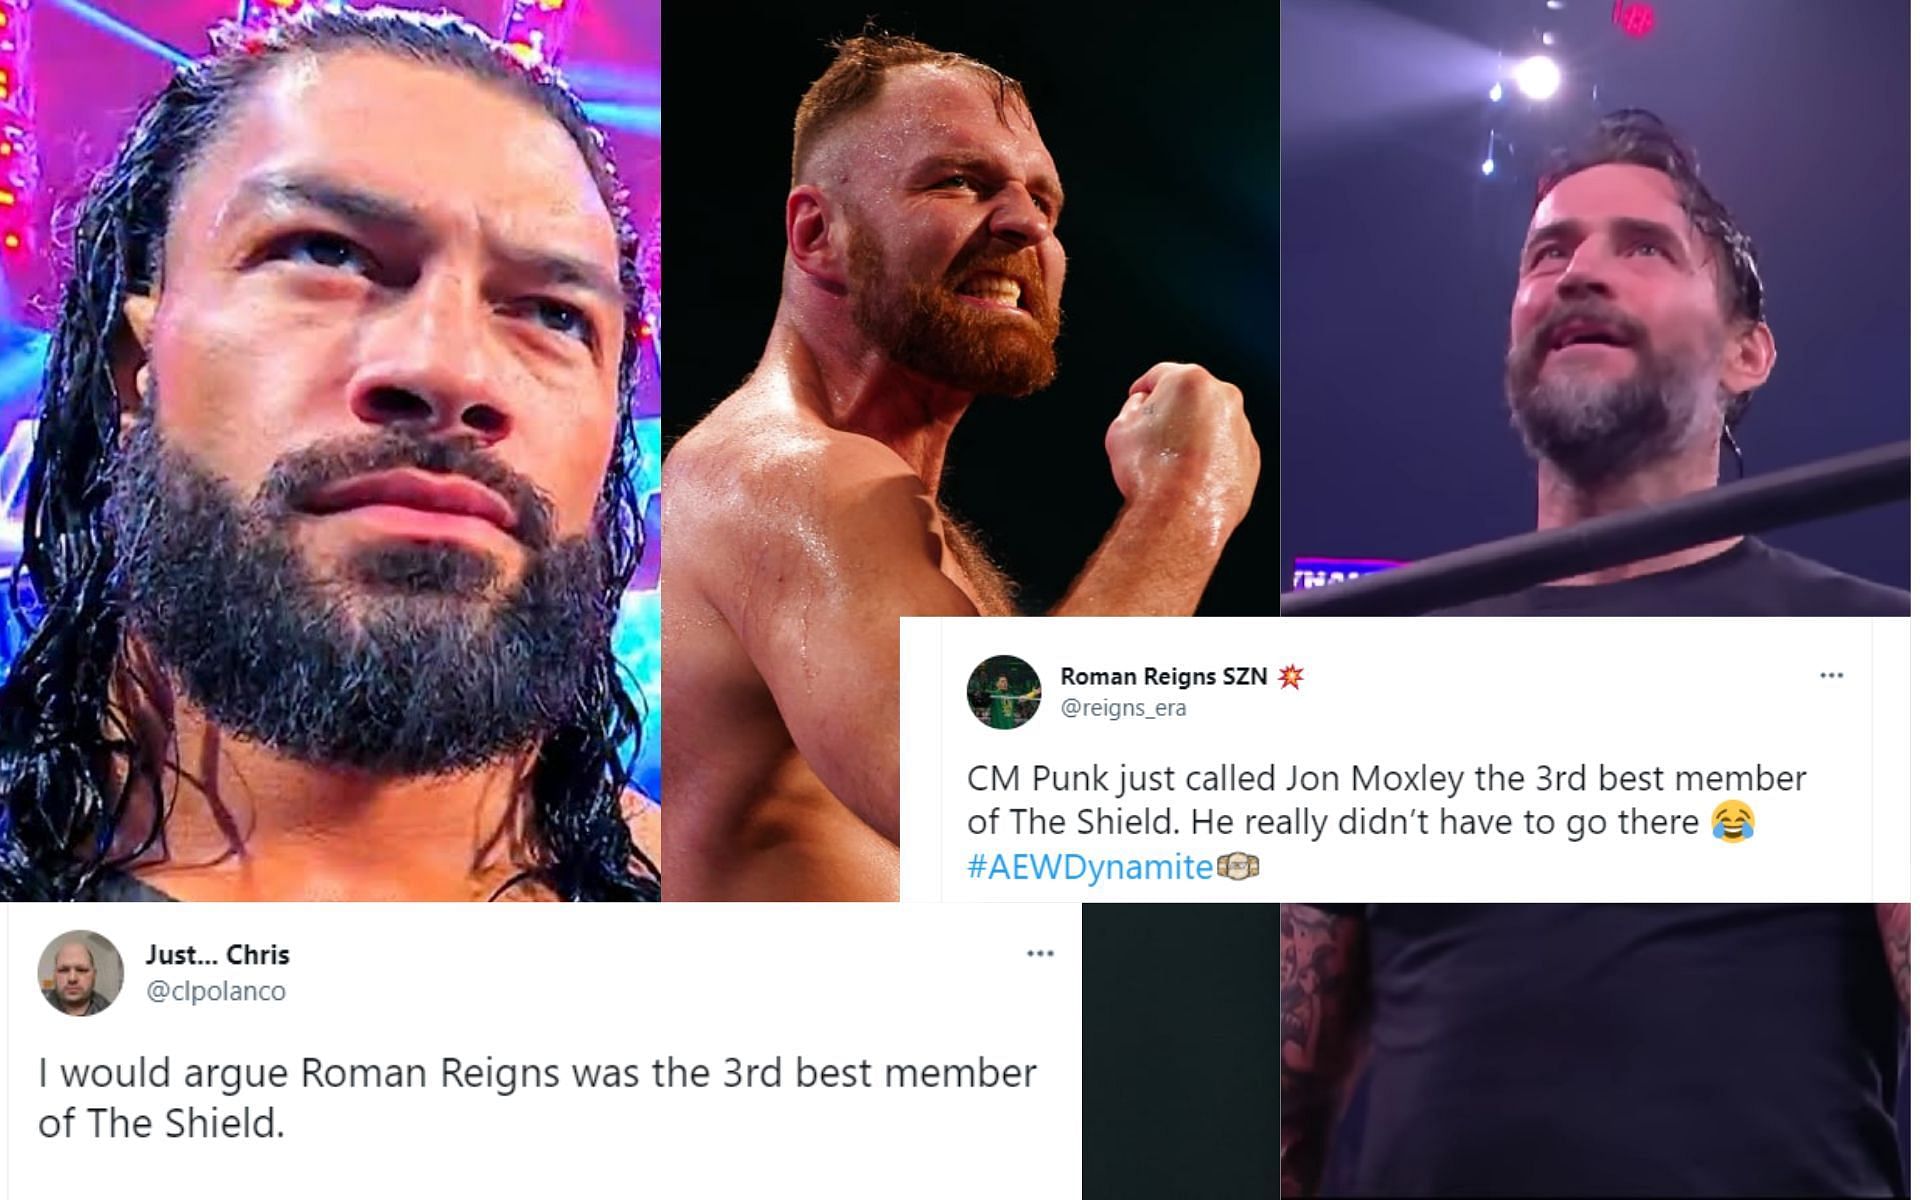 Twitter Explodes After Cm Punk Makes Multiple Wwe References To Humiliate Jon Moxley